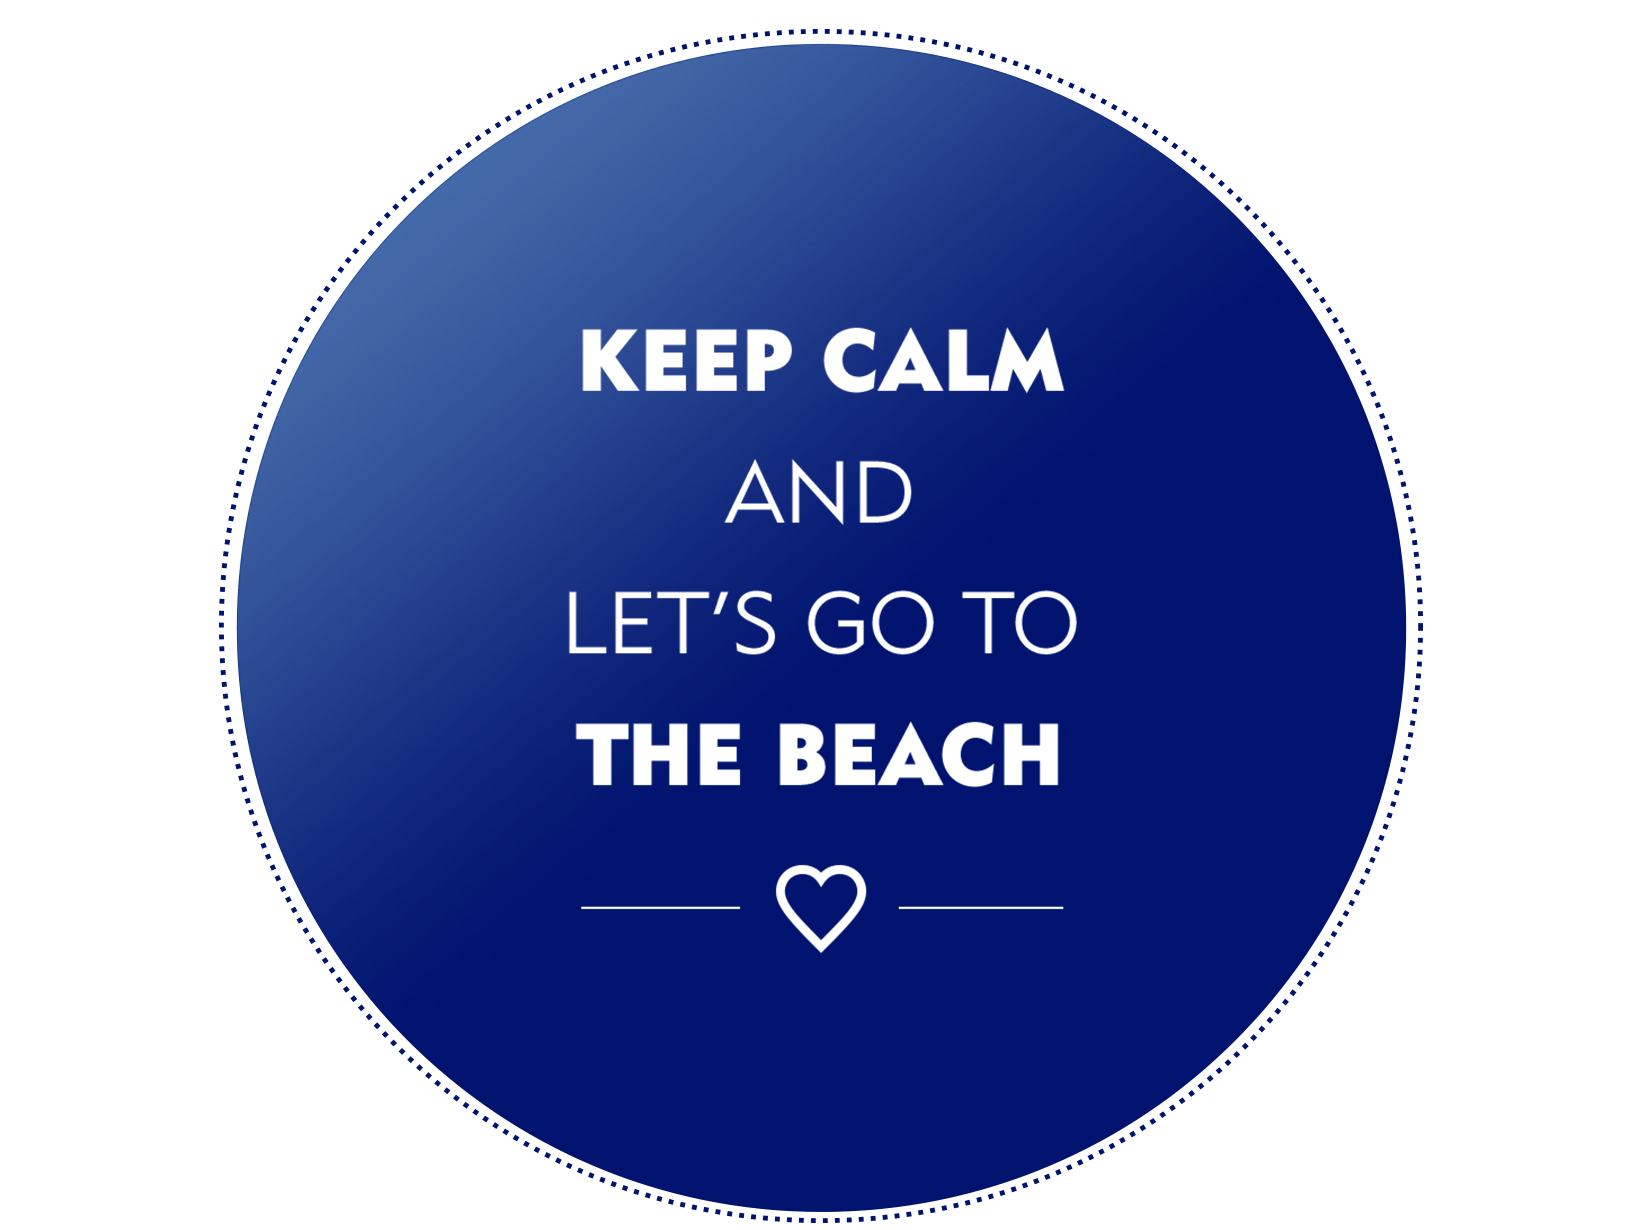 Keep calm and let's go to the beach